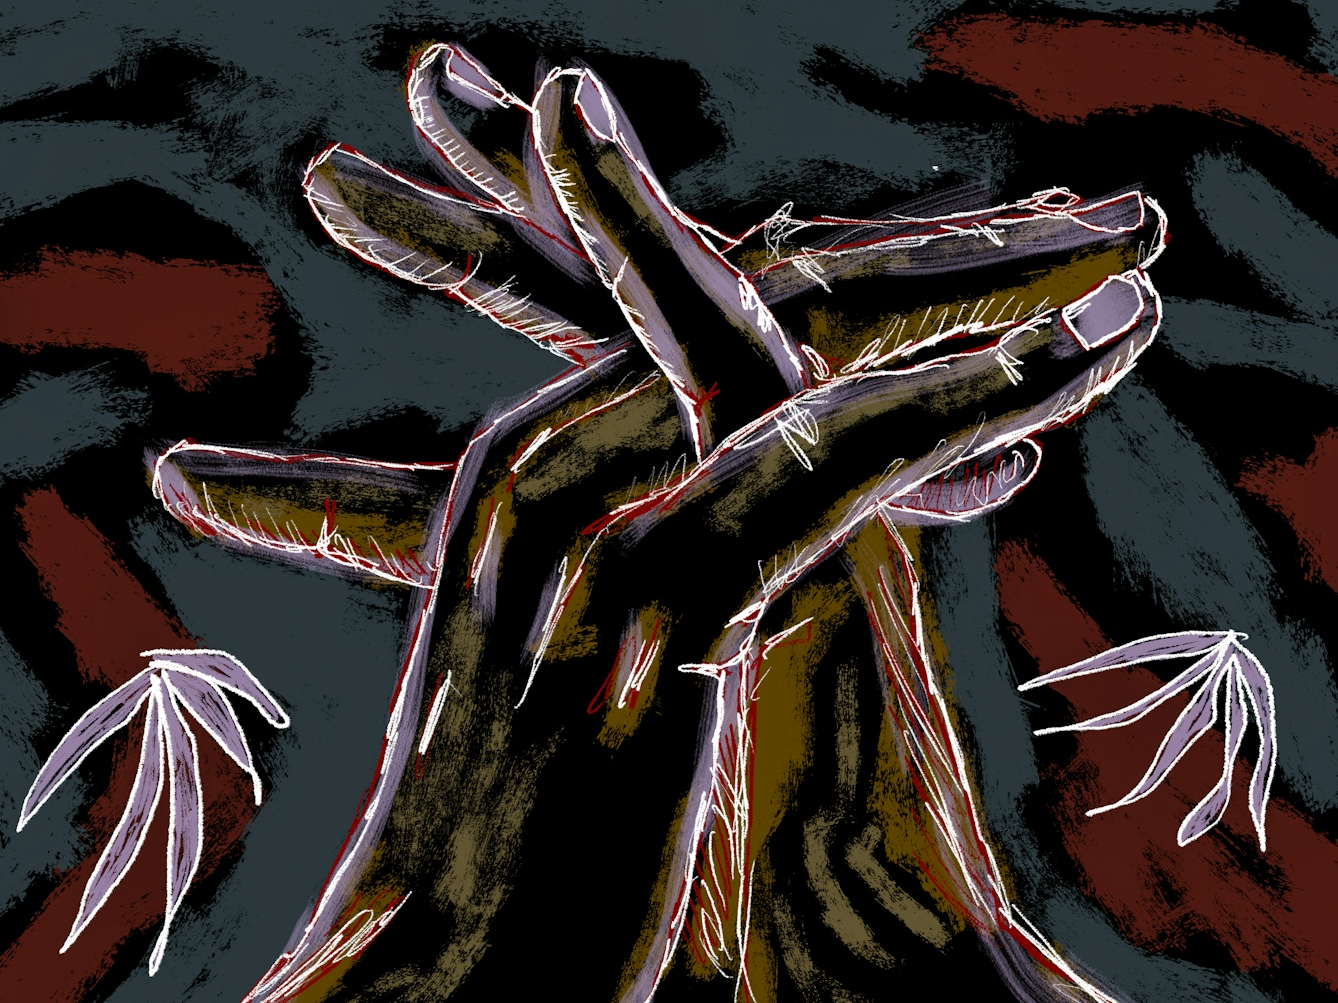 Detail from a larger colour digital artwork showing a figurative study of a pair of hands gracefully suspended in mid air, visible from just above the wrists. The hand hands are clasped together, the fingers gently latticed. The background is made up of dark textured rough lines of dark red, dark blue greys and blacks, punctuated by white outlined purple leaf-like plants.